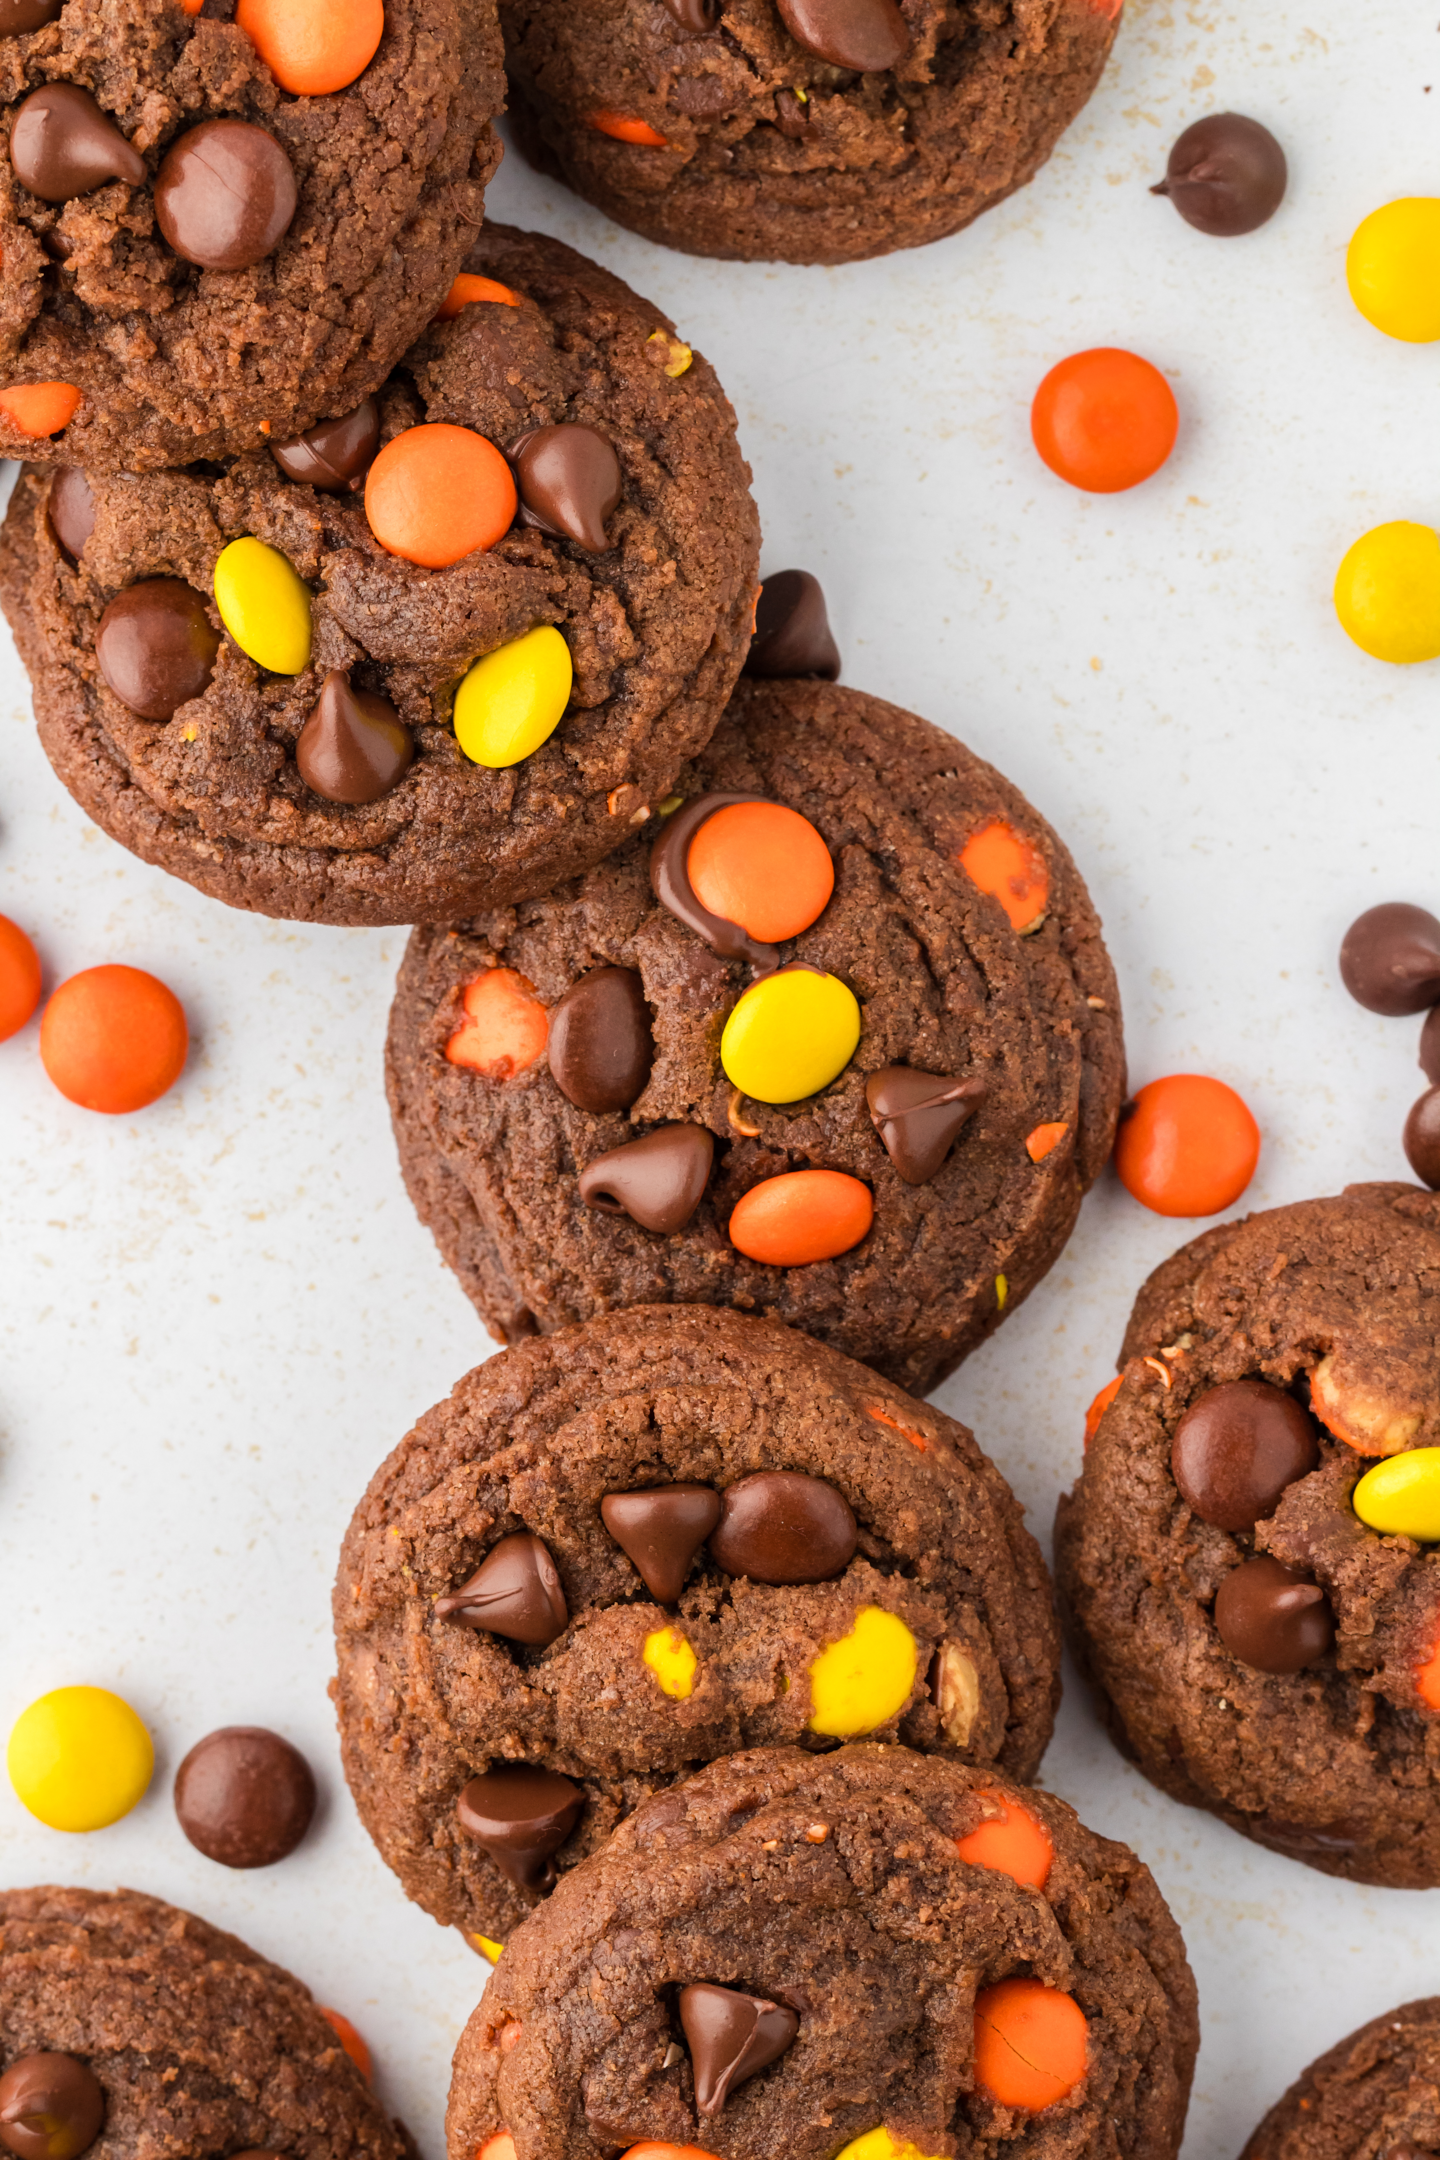 reese's pieces chocolate cookies scattered on counter